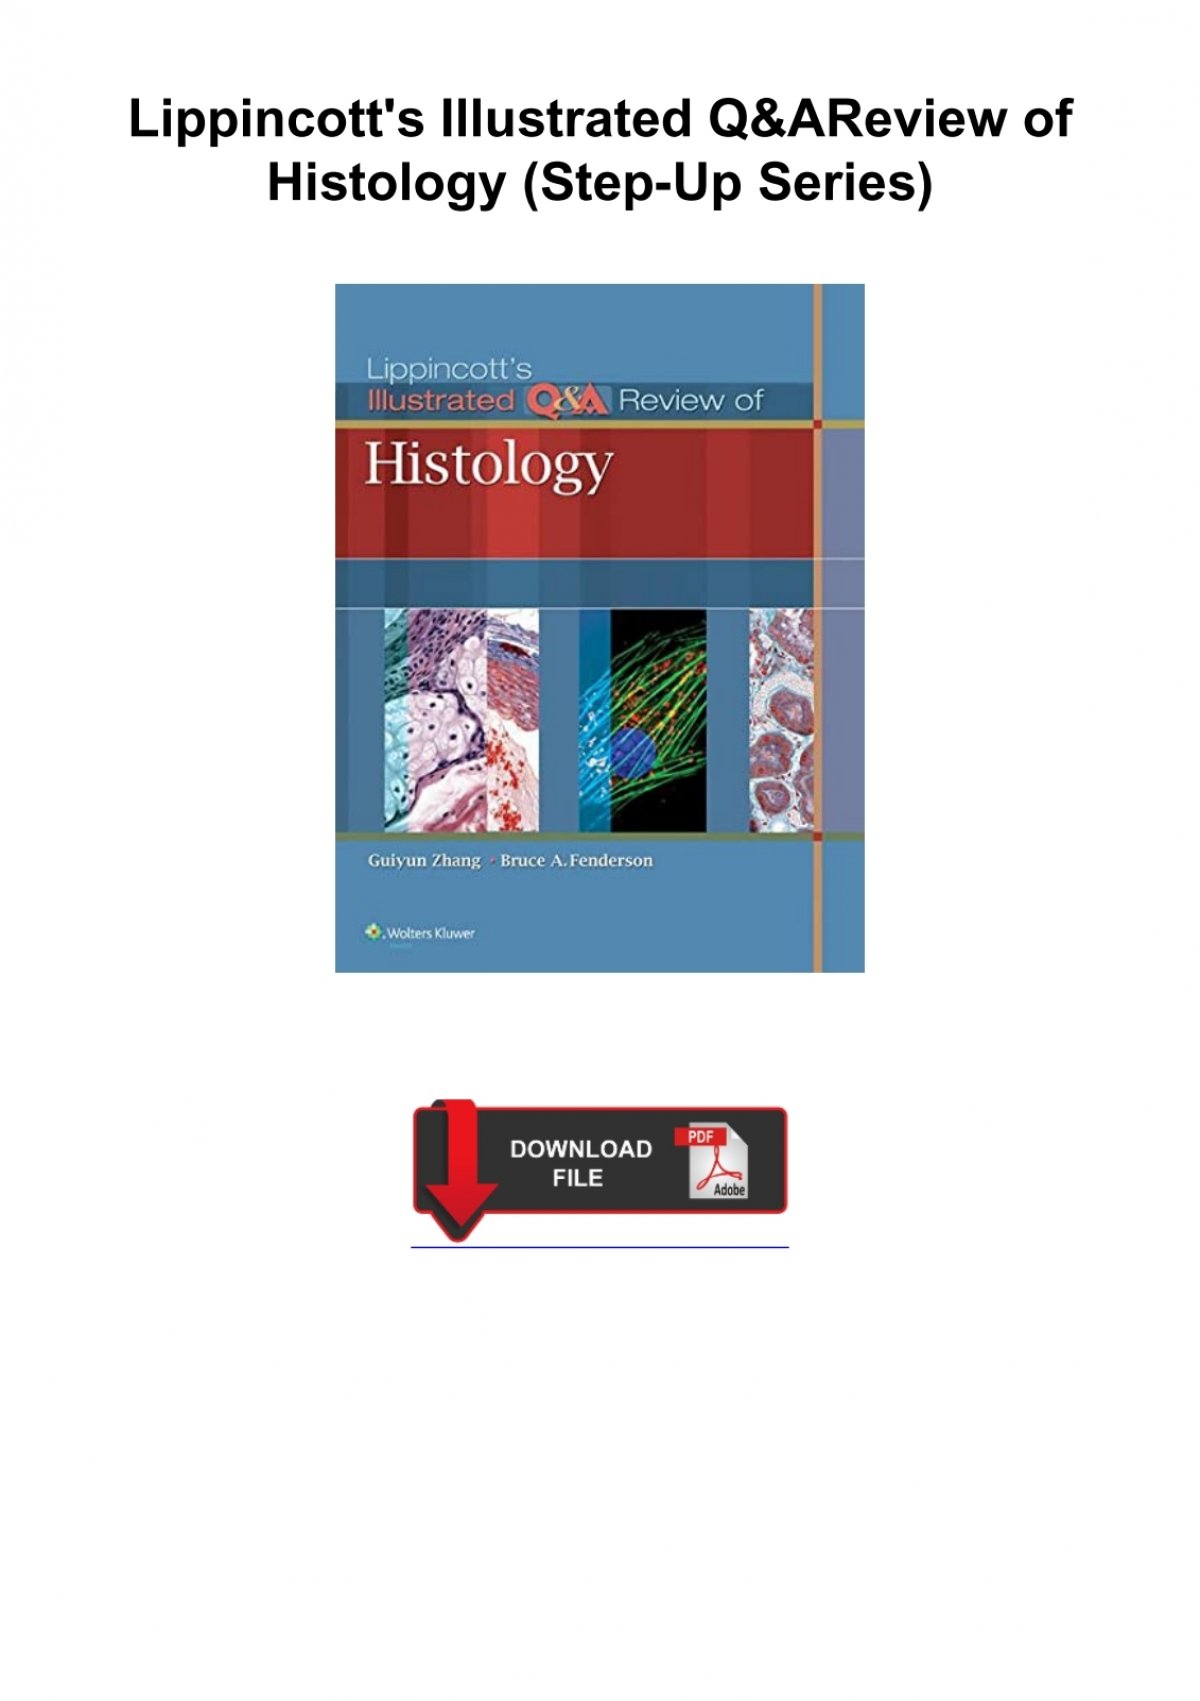 lippincott illustrated qa review of histology pdf download